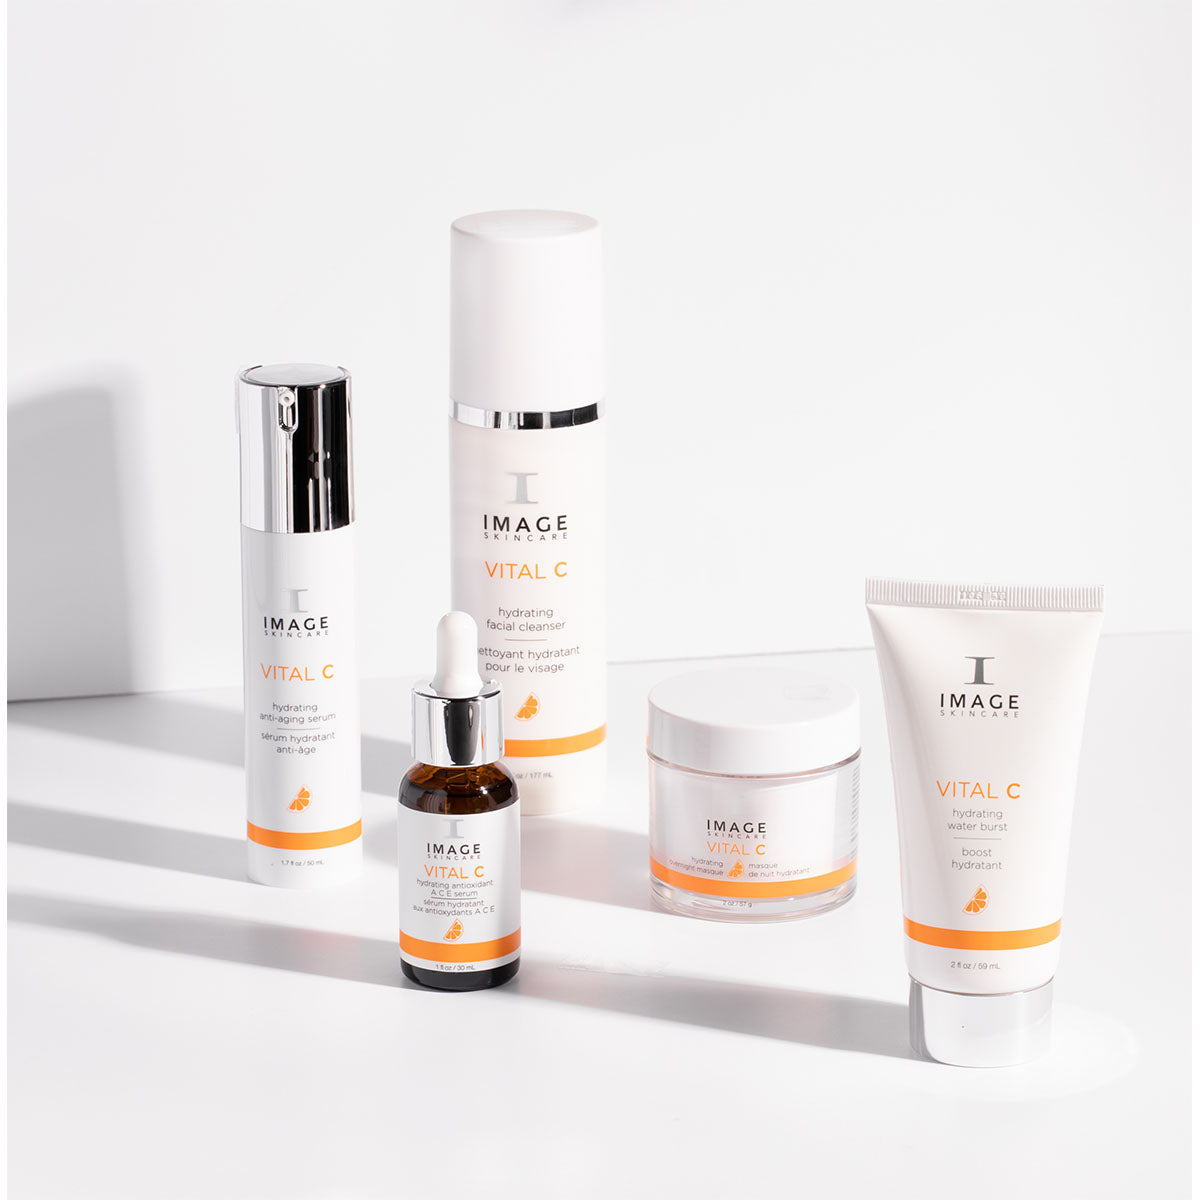 Image Skincare collection of VITAL C products formulated with vitamin C for anti aging. 